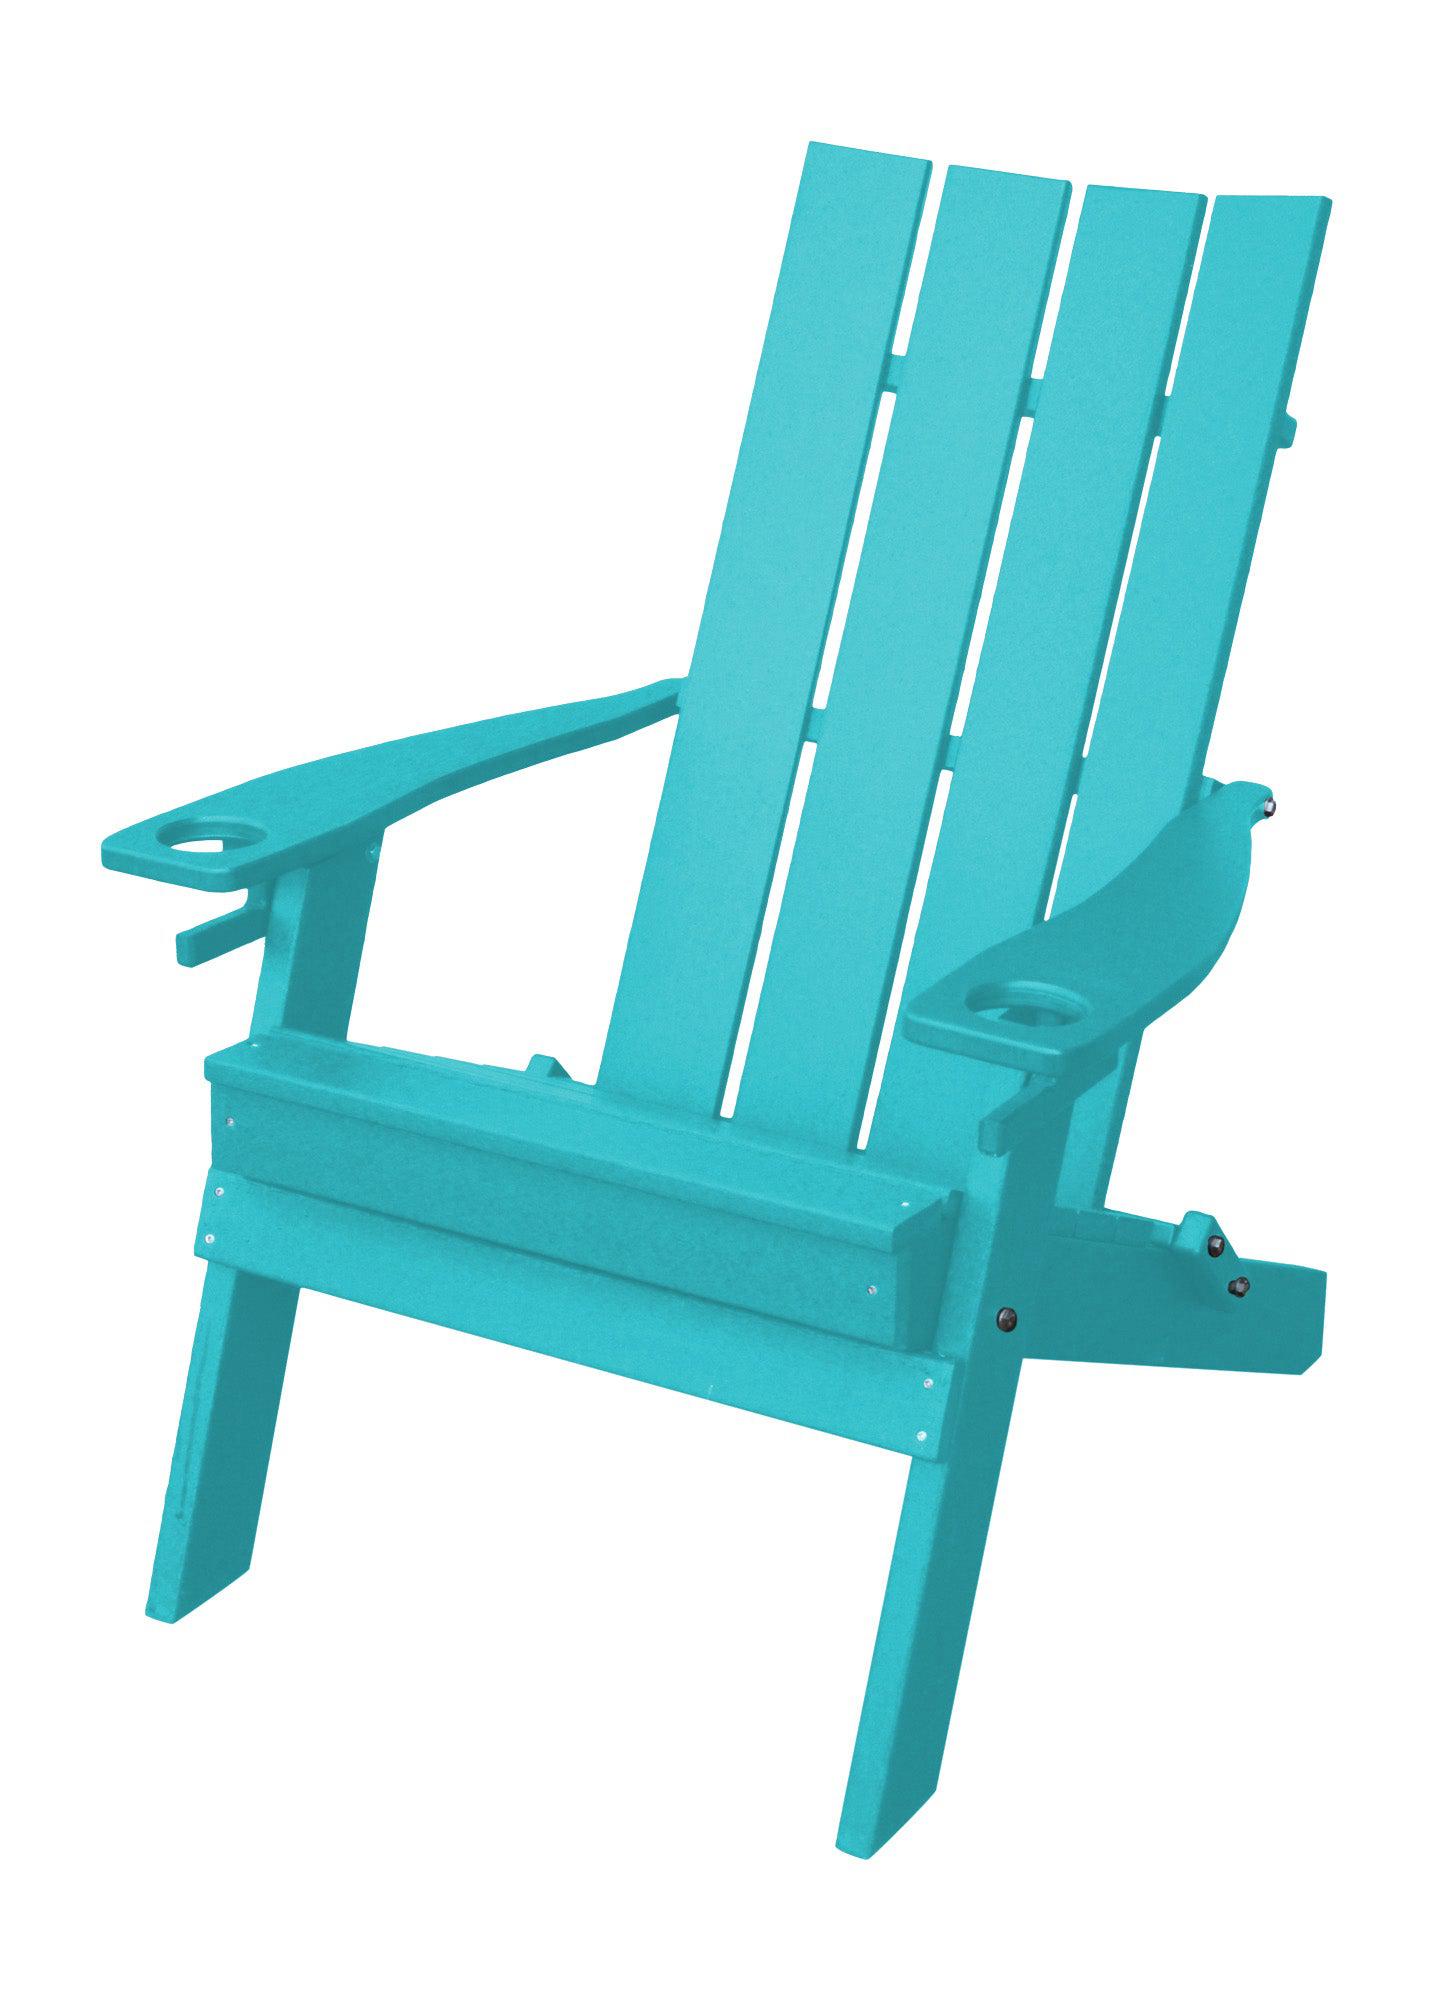 A&L Furniture Co. Amish Made Recycled Plastic Hampton Outdoor Furniture Collection